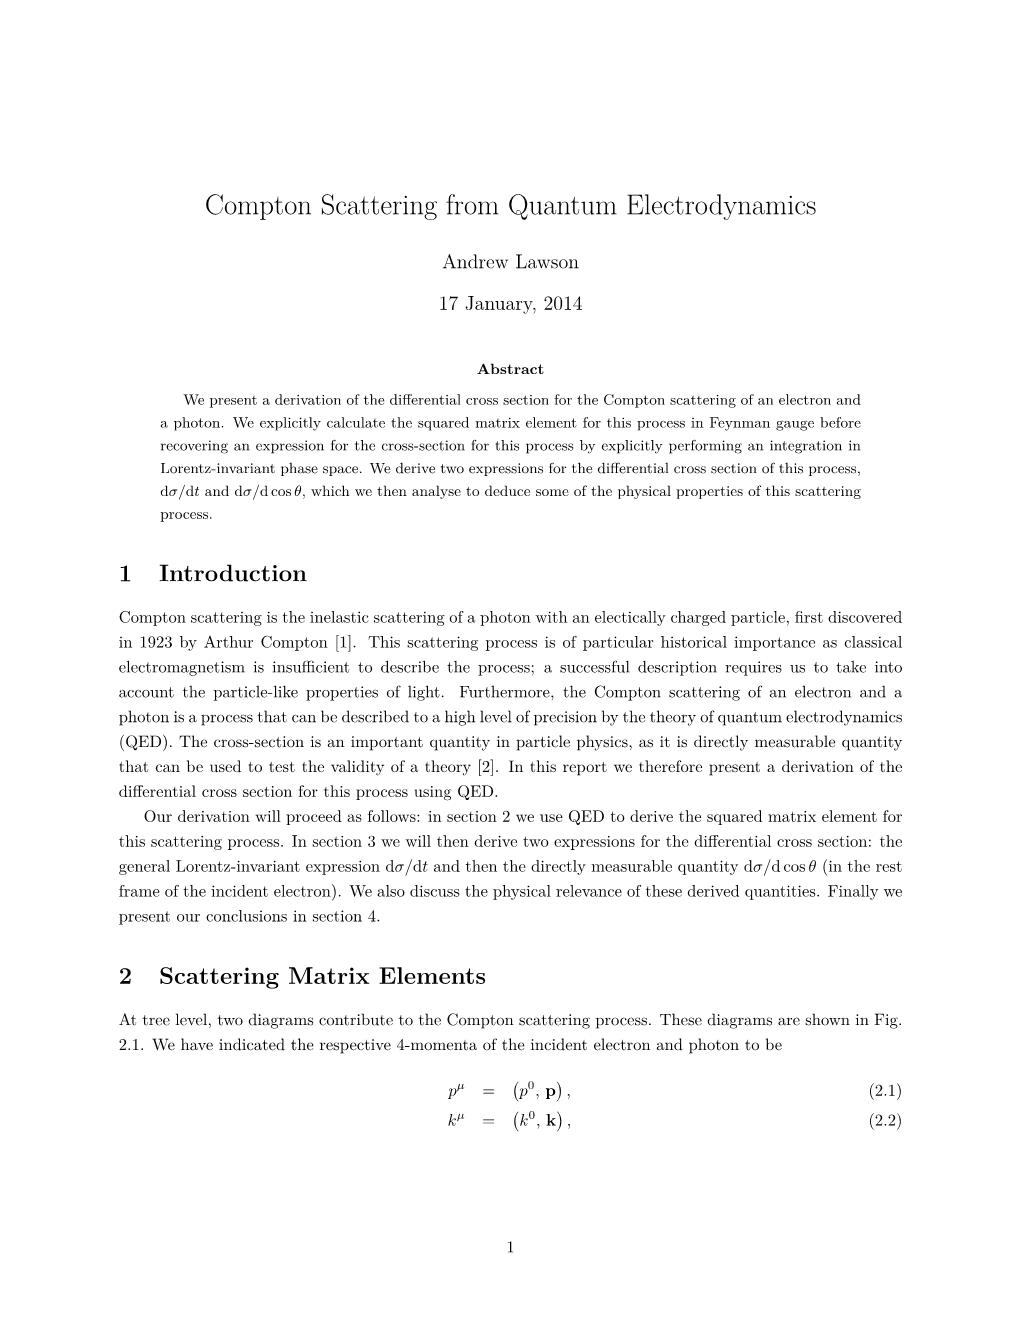 Compton Scattering from Quantum Electrodynamics